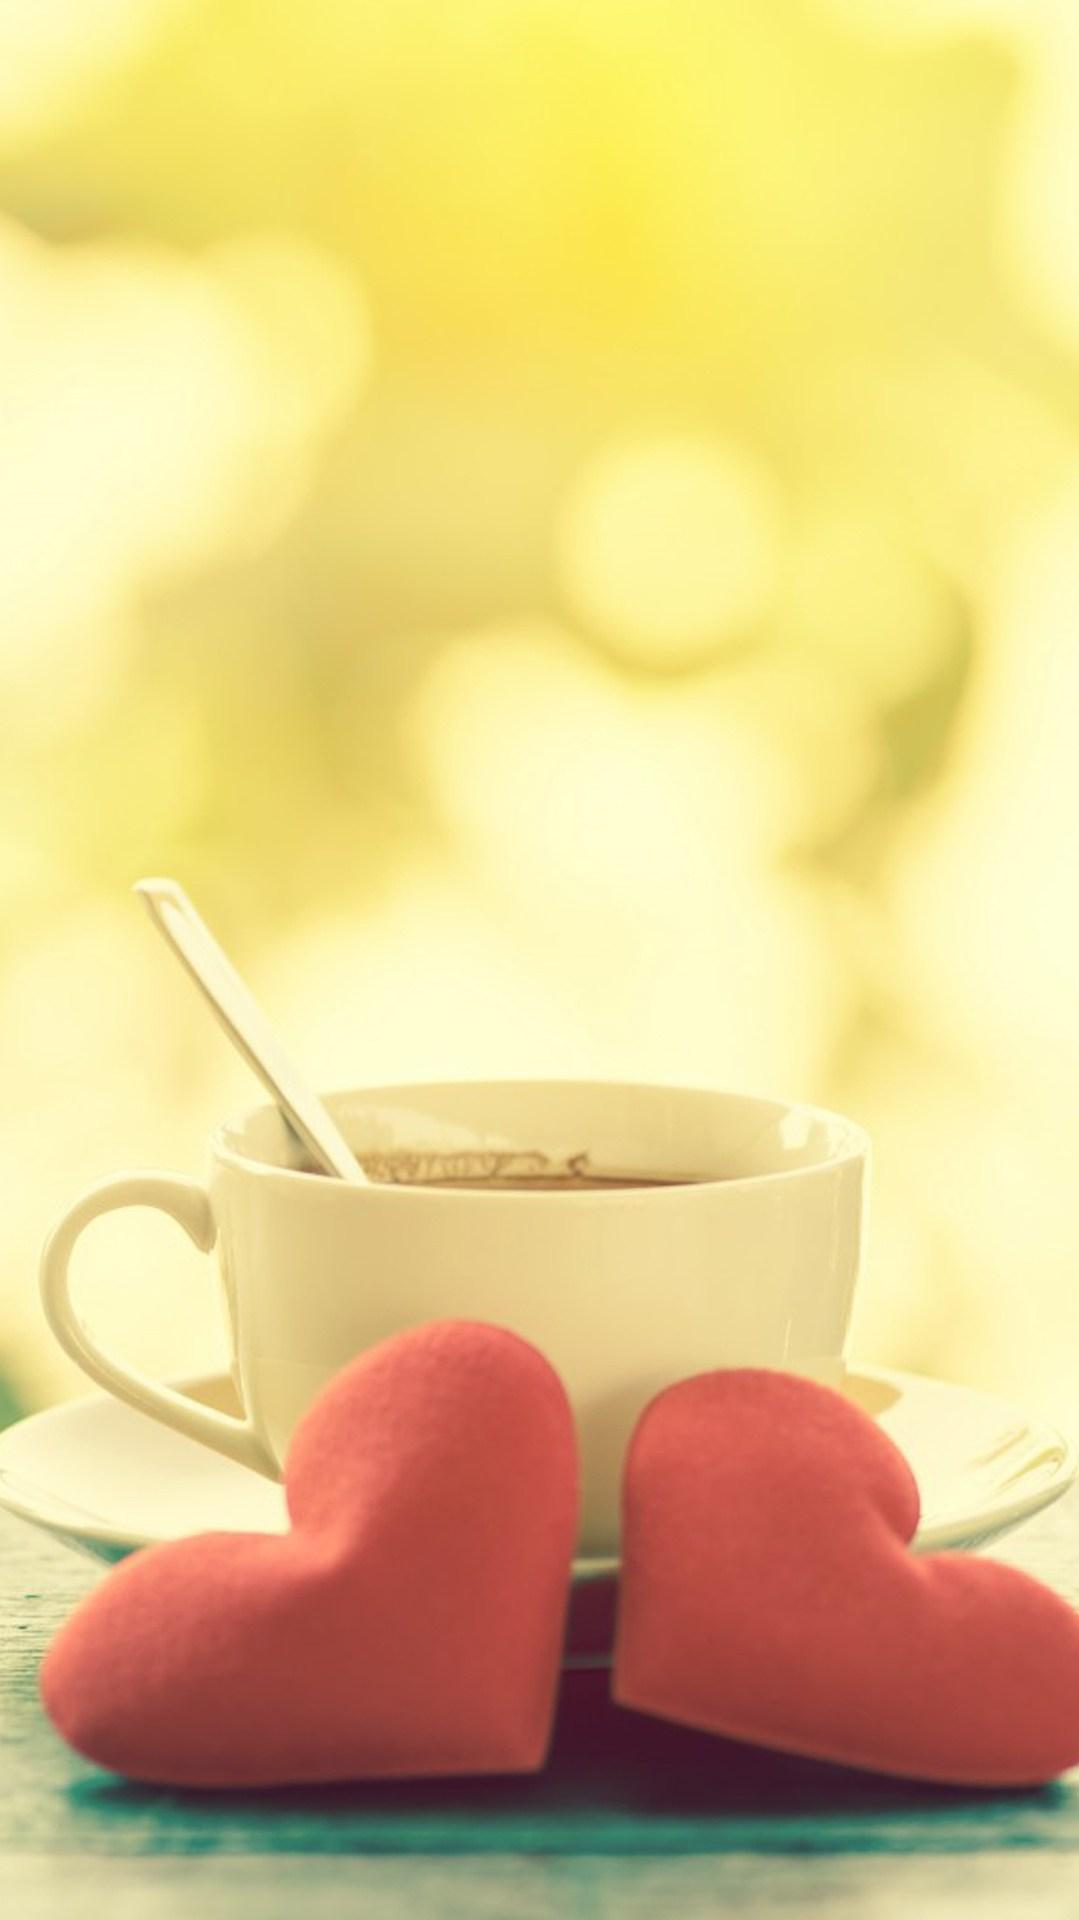 Warm Love Coffee IPhone 6 6 Plus And IPhone 5 4 Wallpaper